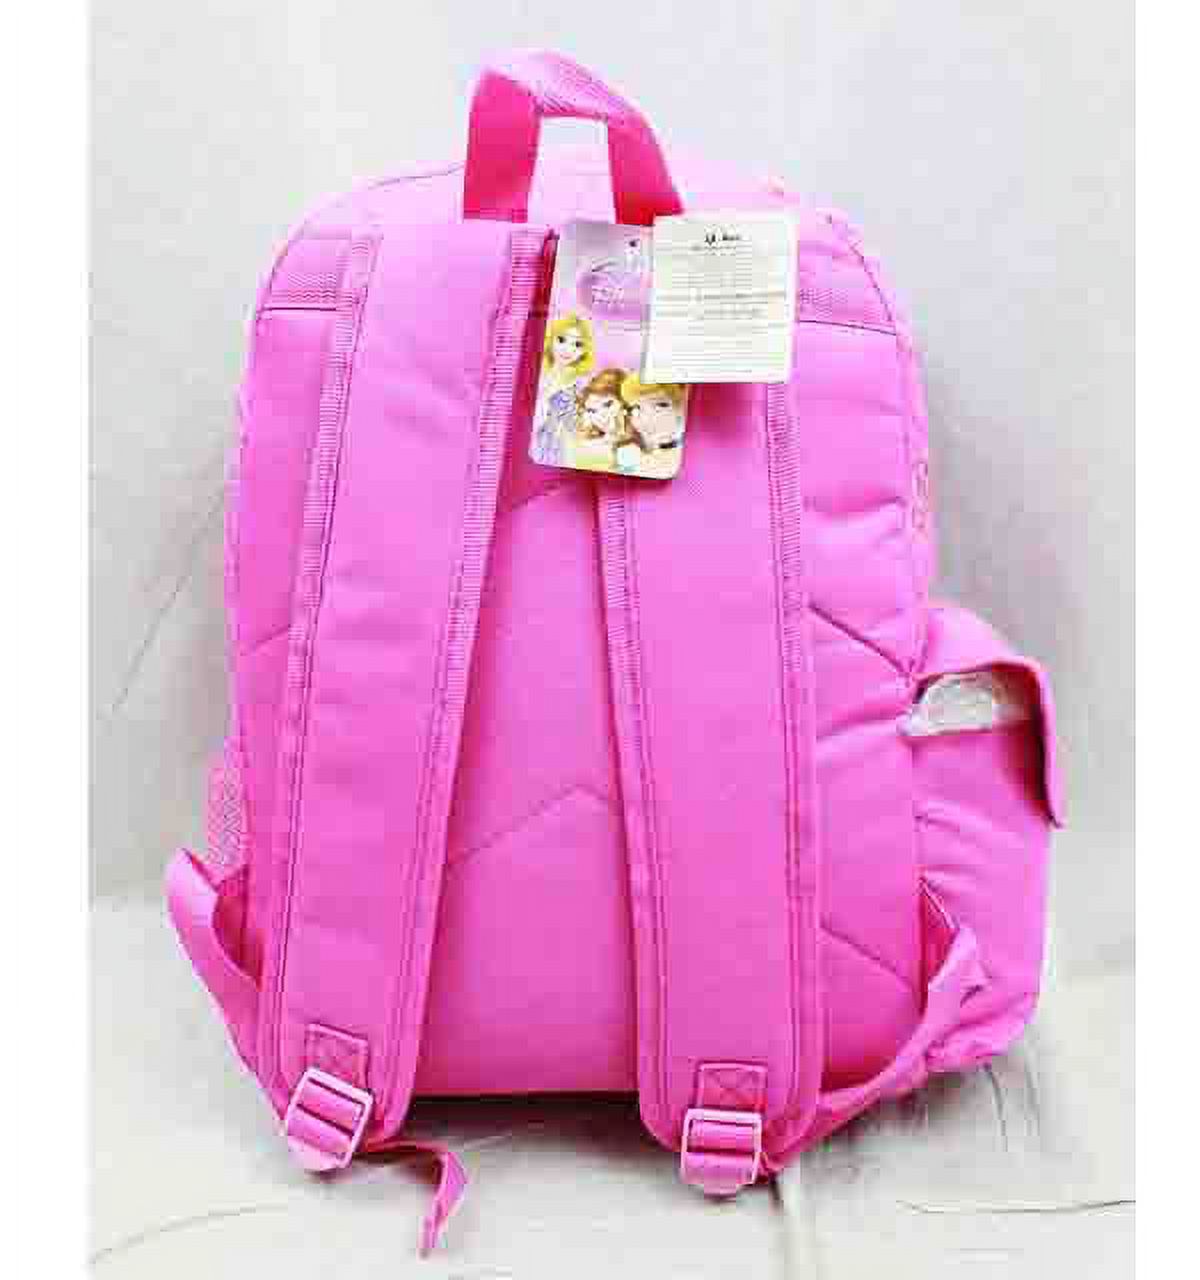 Backpack - - Princess w/ Flowers Pink Large Girls School Bag New a03888 - image 3 of 3